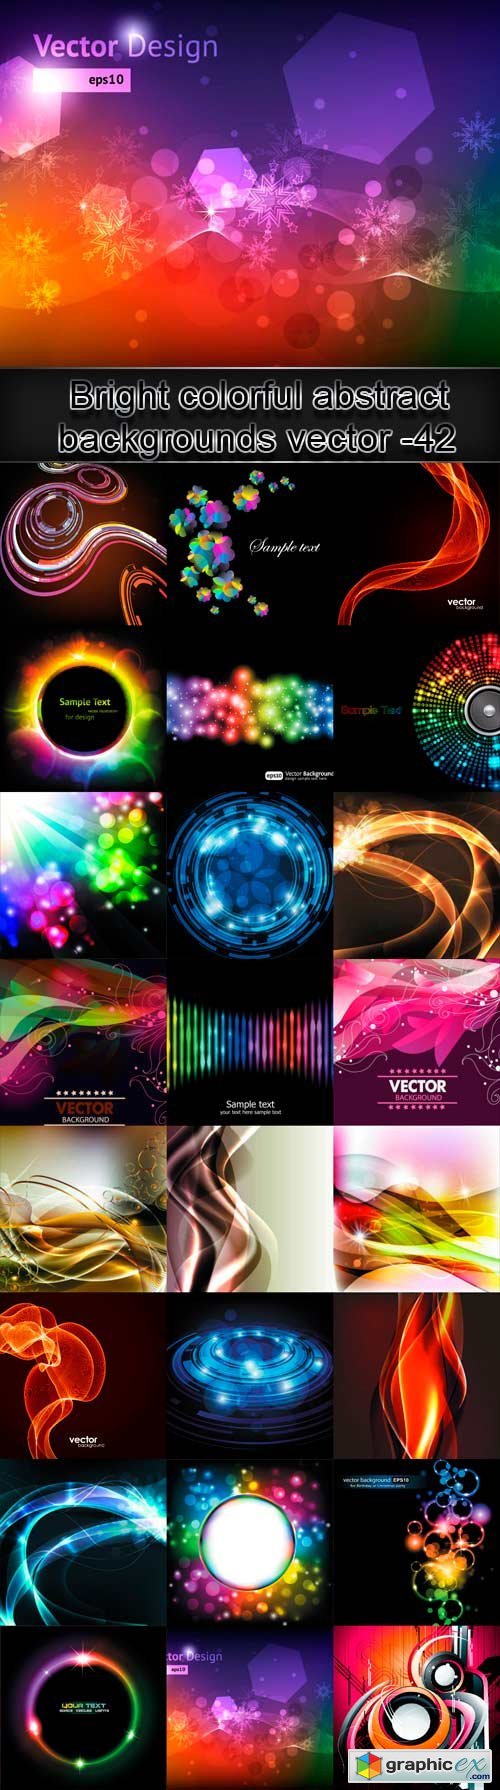 Bright colorful abstract backgrounds vector -42